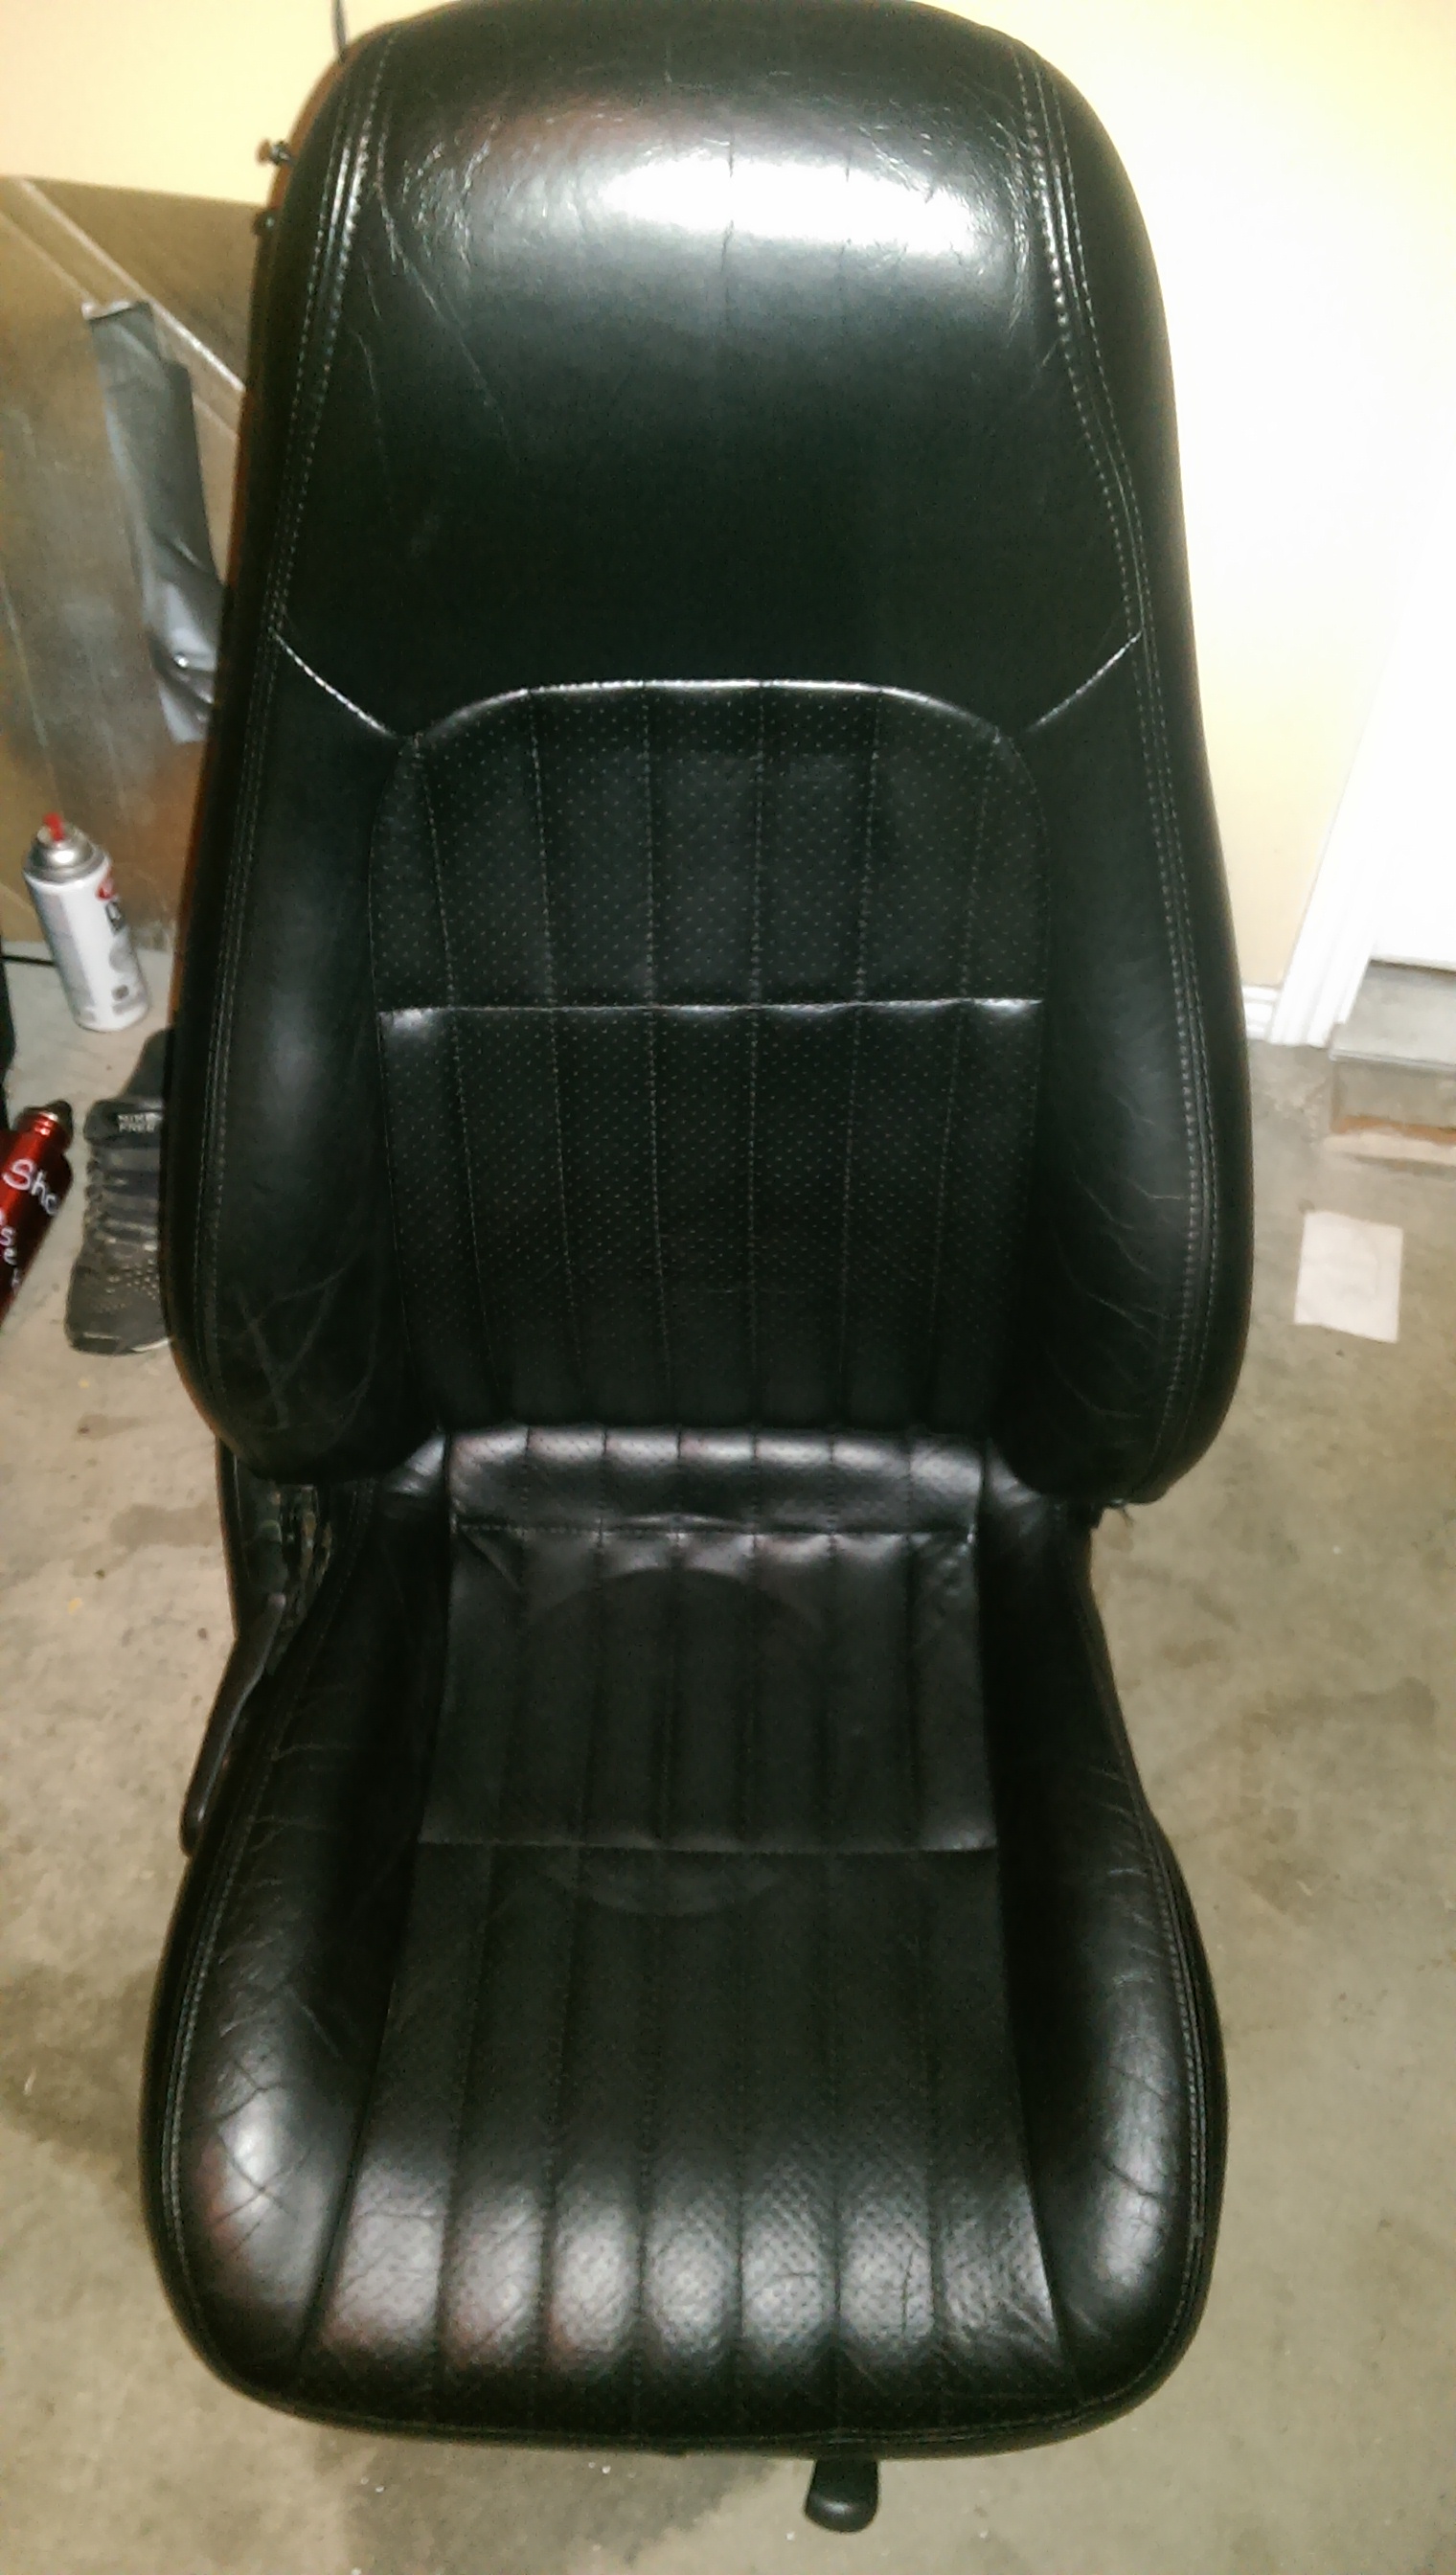 Painted My Seats With Vinyl And Fabric Spray Paint Ls1tech